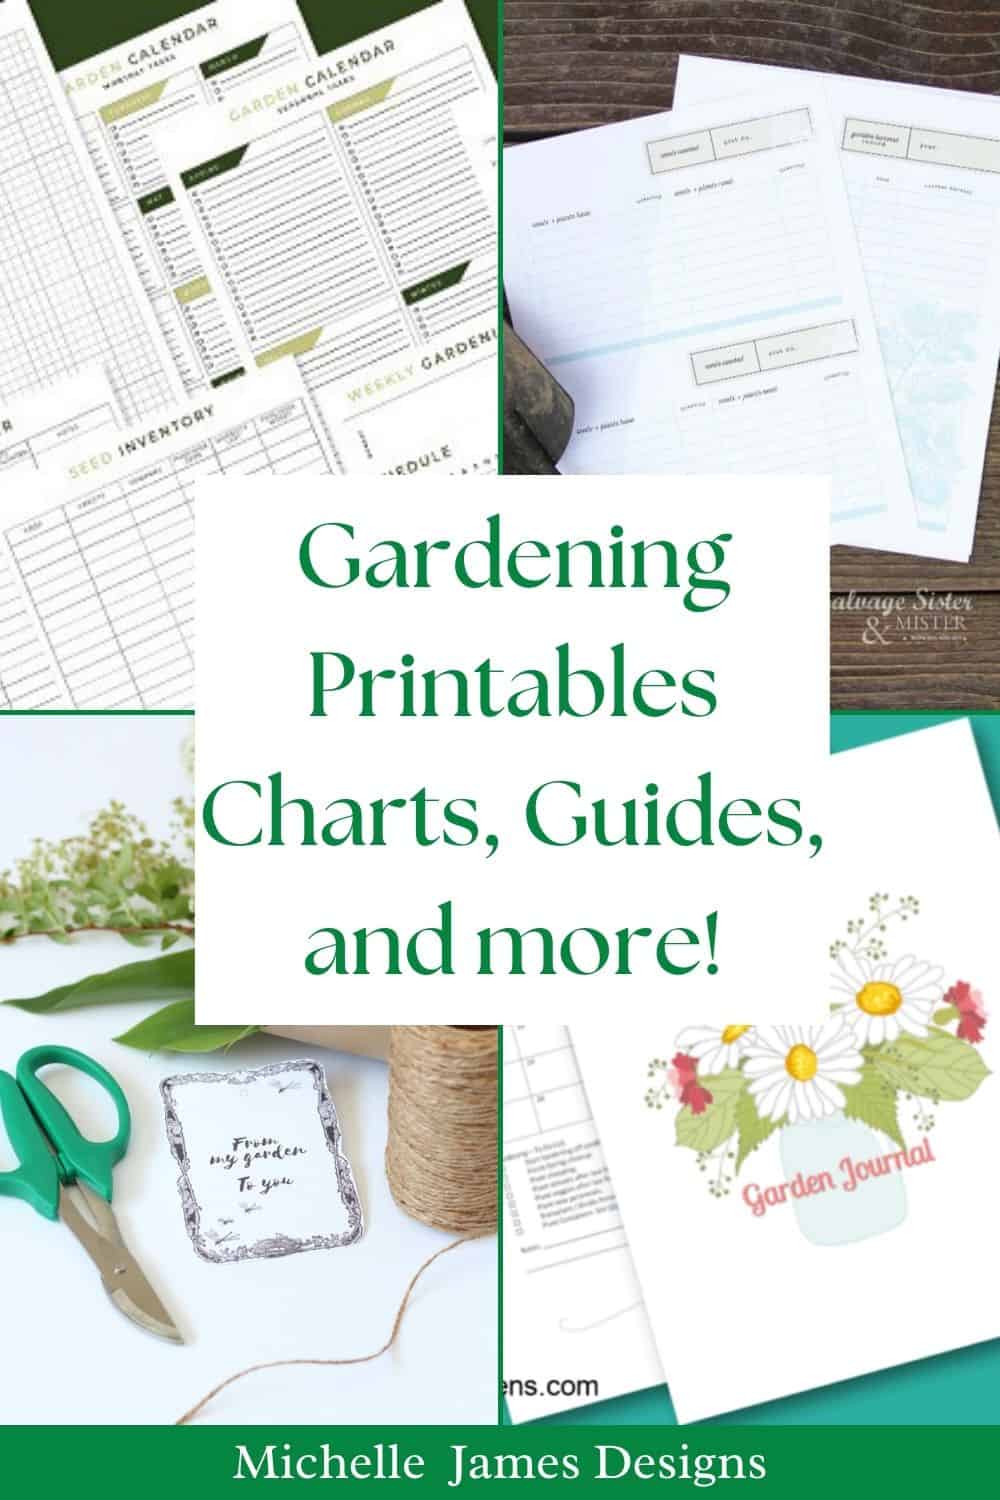 17 gardening printables collage of four